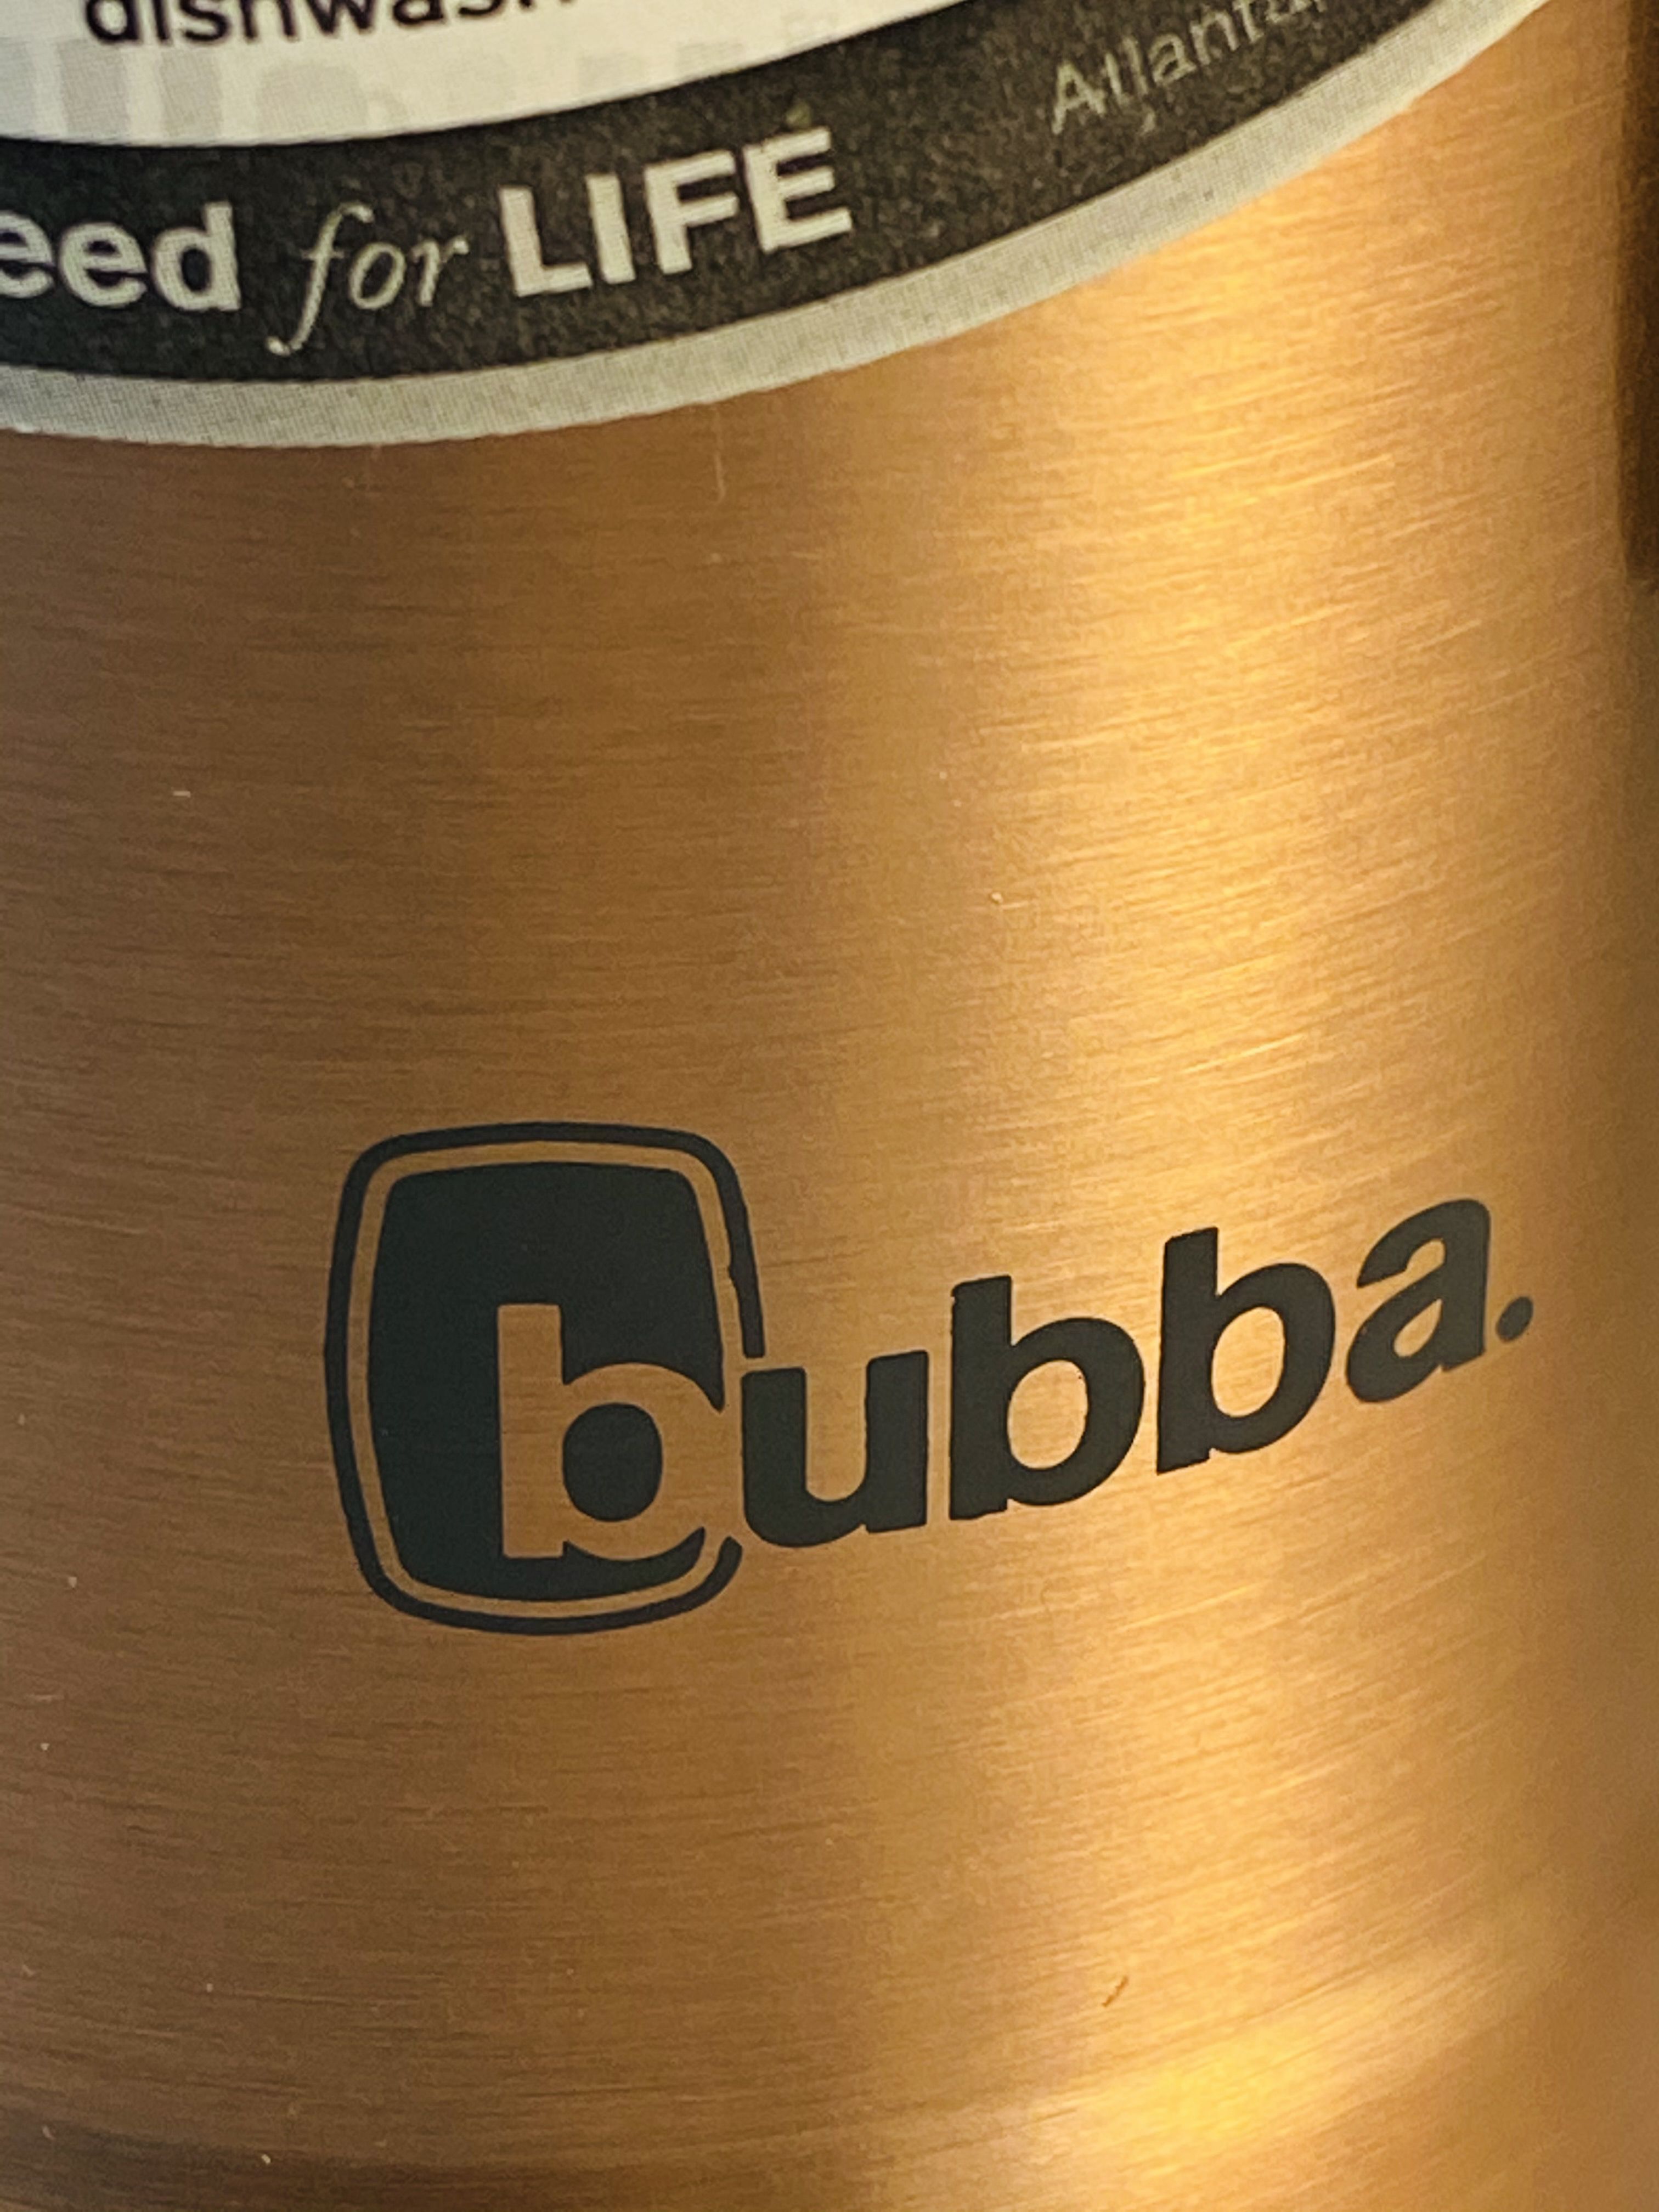 Bubba Insulated Copper Colored Thermos Travel Mug Hot Cold Coffee Tea 18oz  Tumbler Cup for Sale in San Antonio, TX - OfferUp